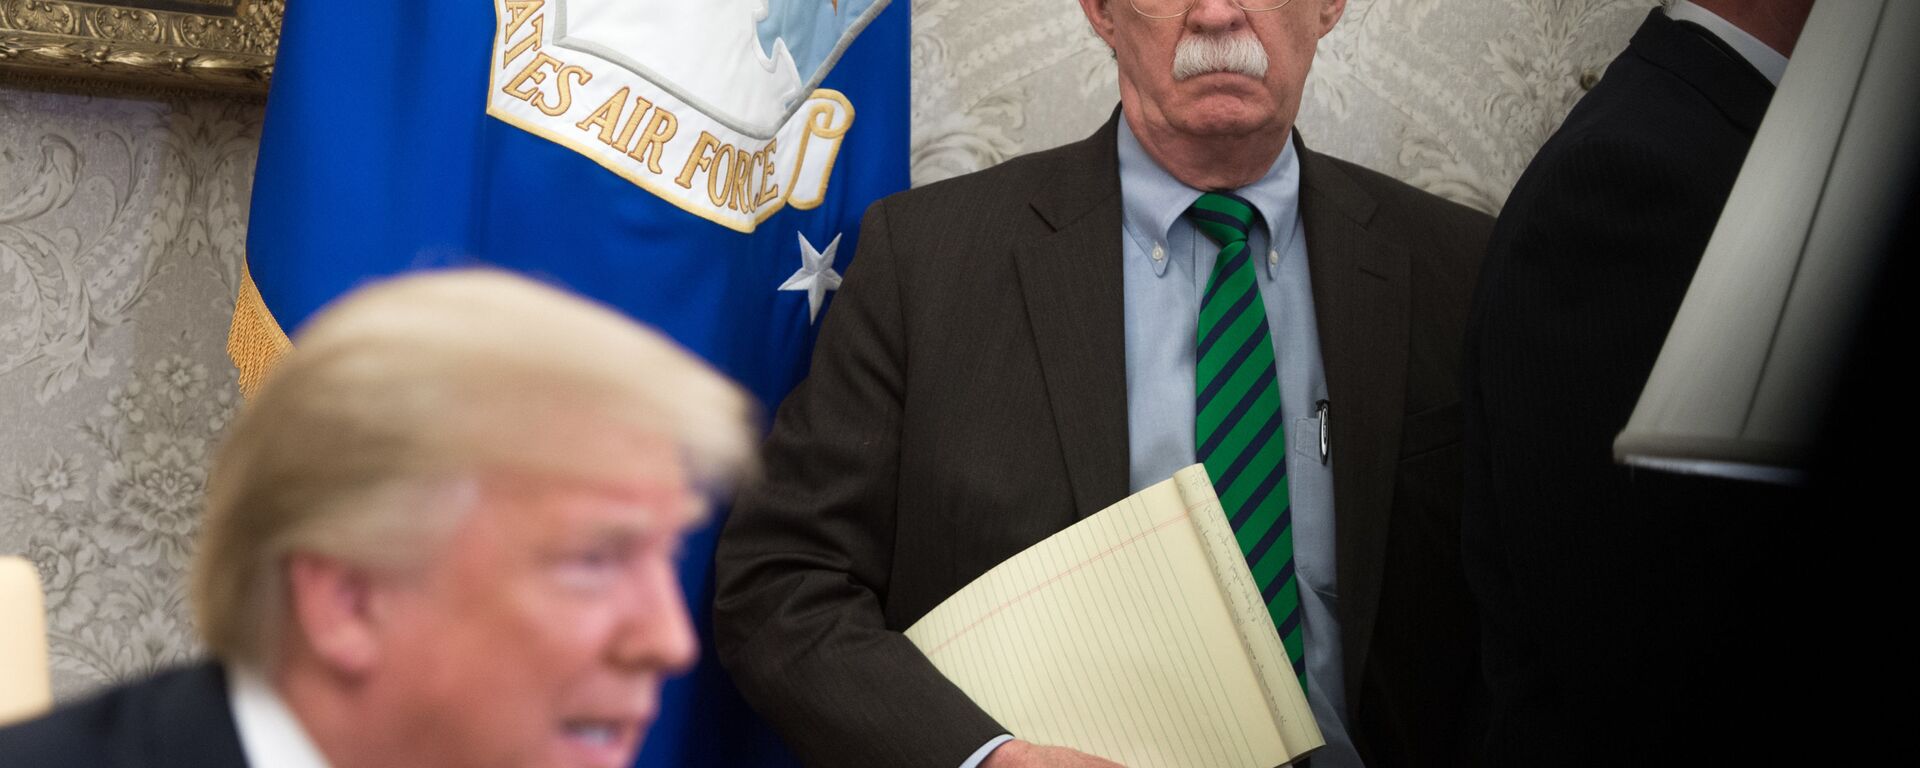  In this file photo National Security Adviser John Bolton stands alongside US President Donald Trump as he speaks during a meeting with NATO Secretary General Jens Stoltenberg in the Oval Office of the White House in Washington, DC, May 17, 2018. - The US Justice Department filed an emergency order Wednesday seeking to halt release of ex-national security advisor John Bolton's book, the second time in two days that President Donald Trump tried to block the tell-all memoir.  - Sputnik International, 1920, 22.06.2020